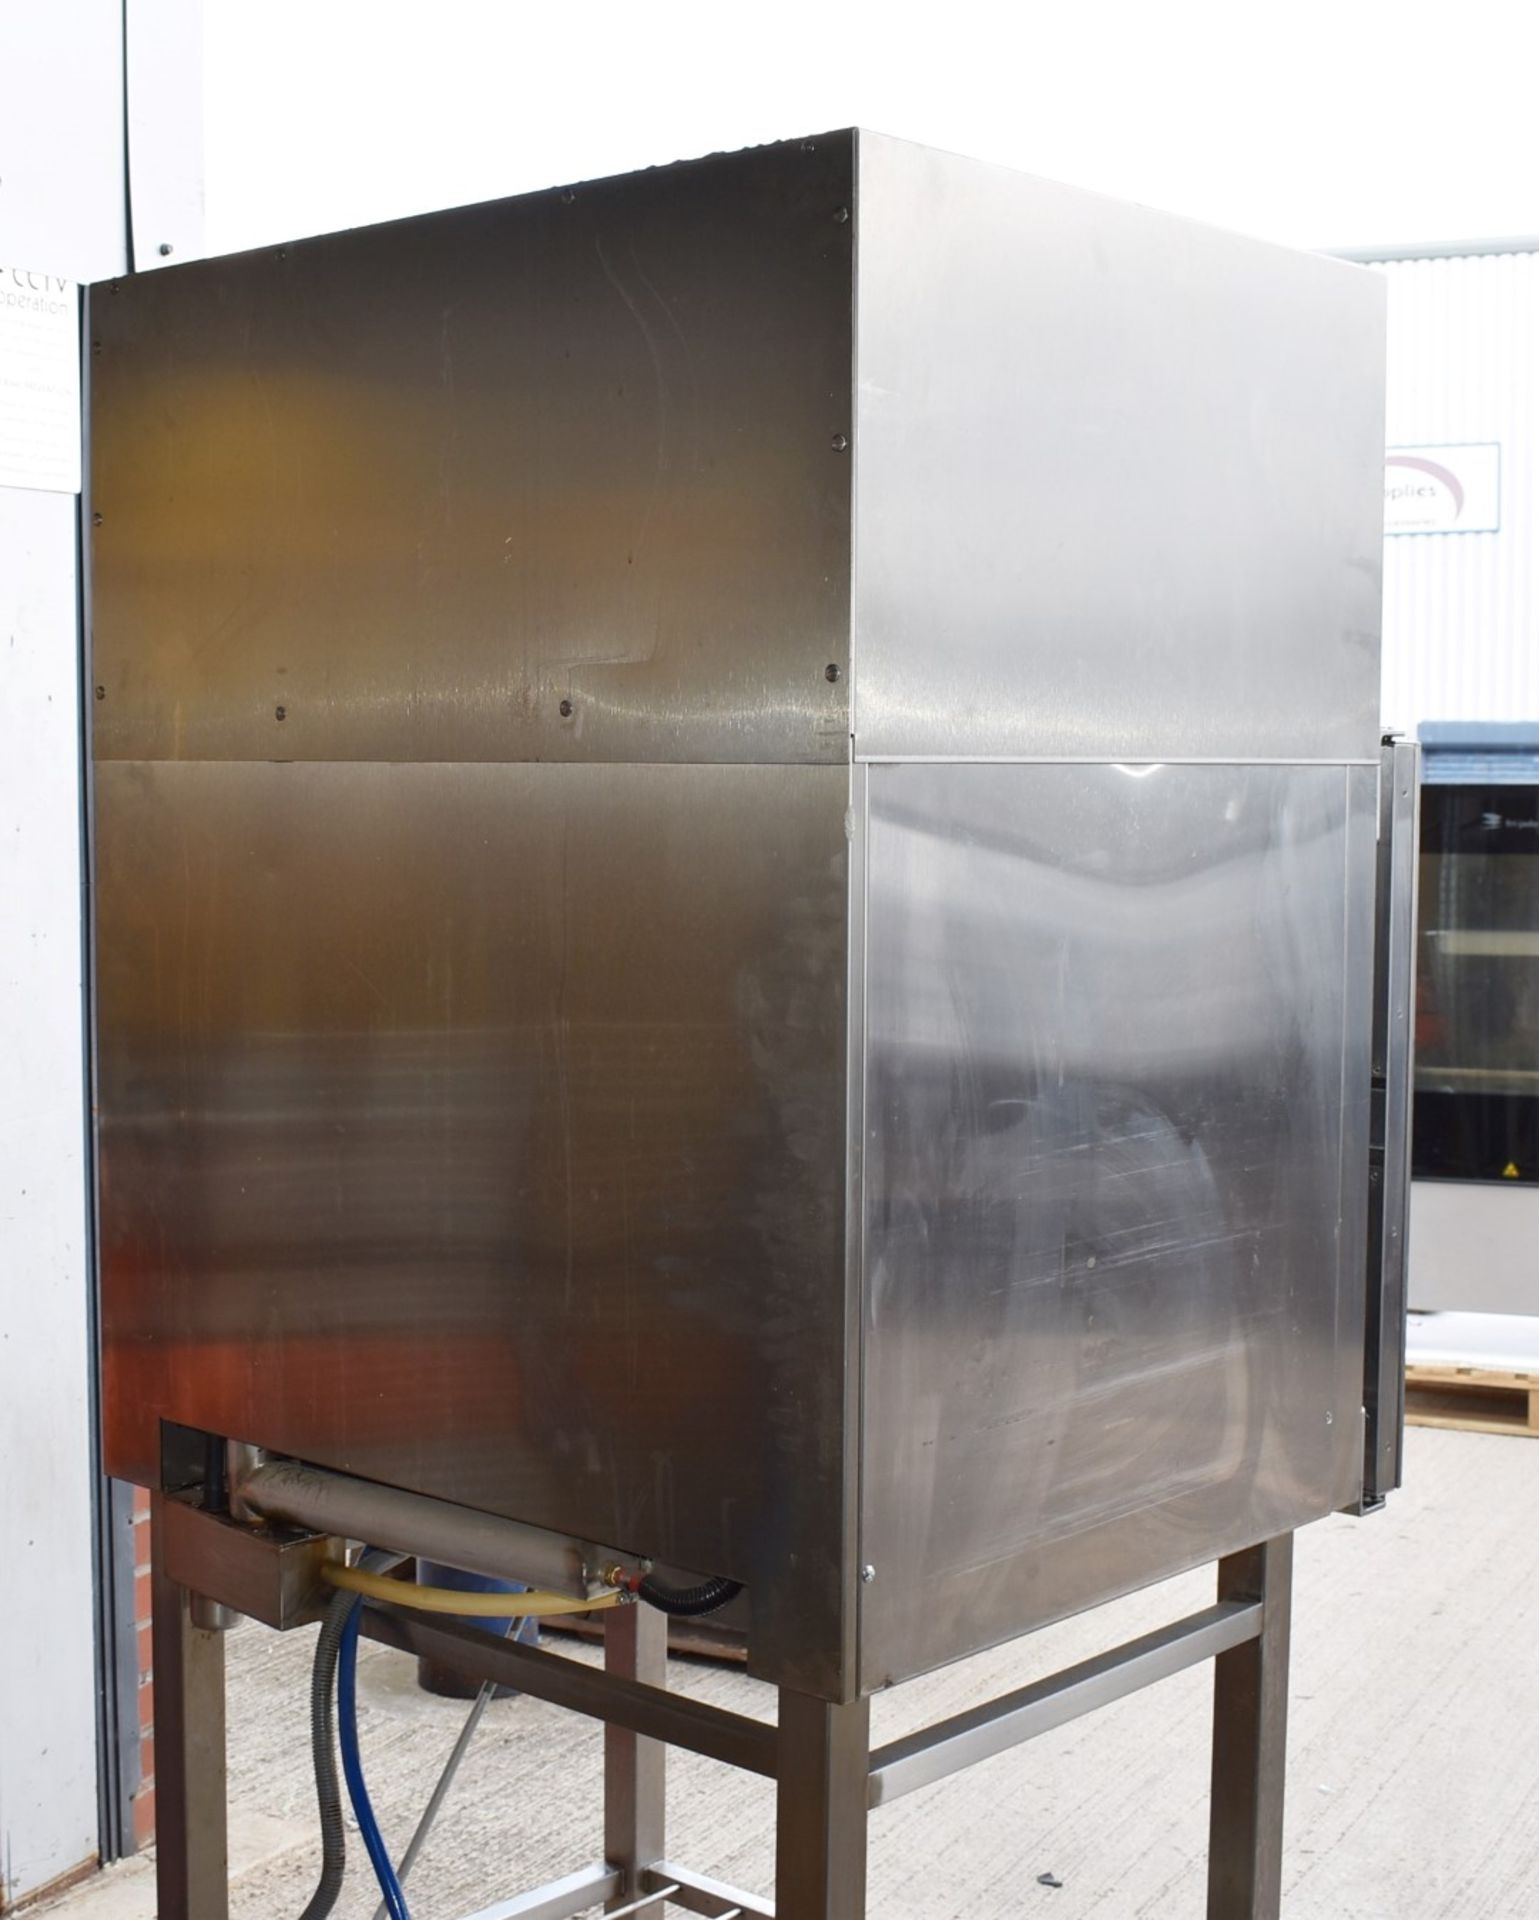 1 x Houno 6 Grid Electric Combi Oven With Stand and Extractor - 3 Phase Electric Power - Model C1.06 - Image 11 of 13